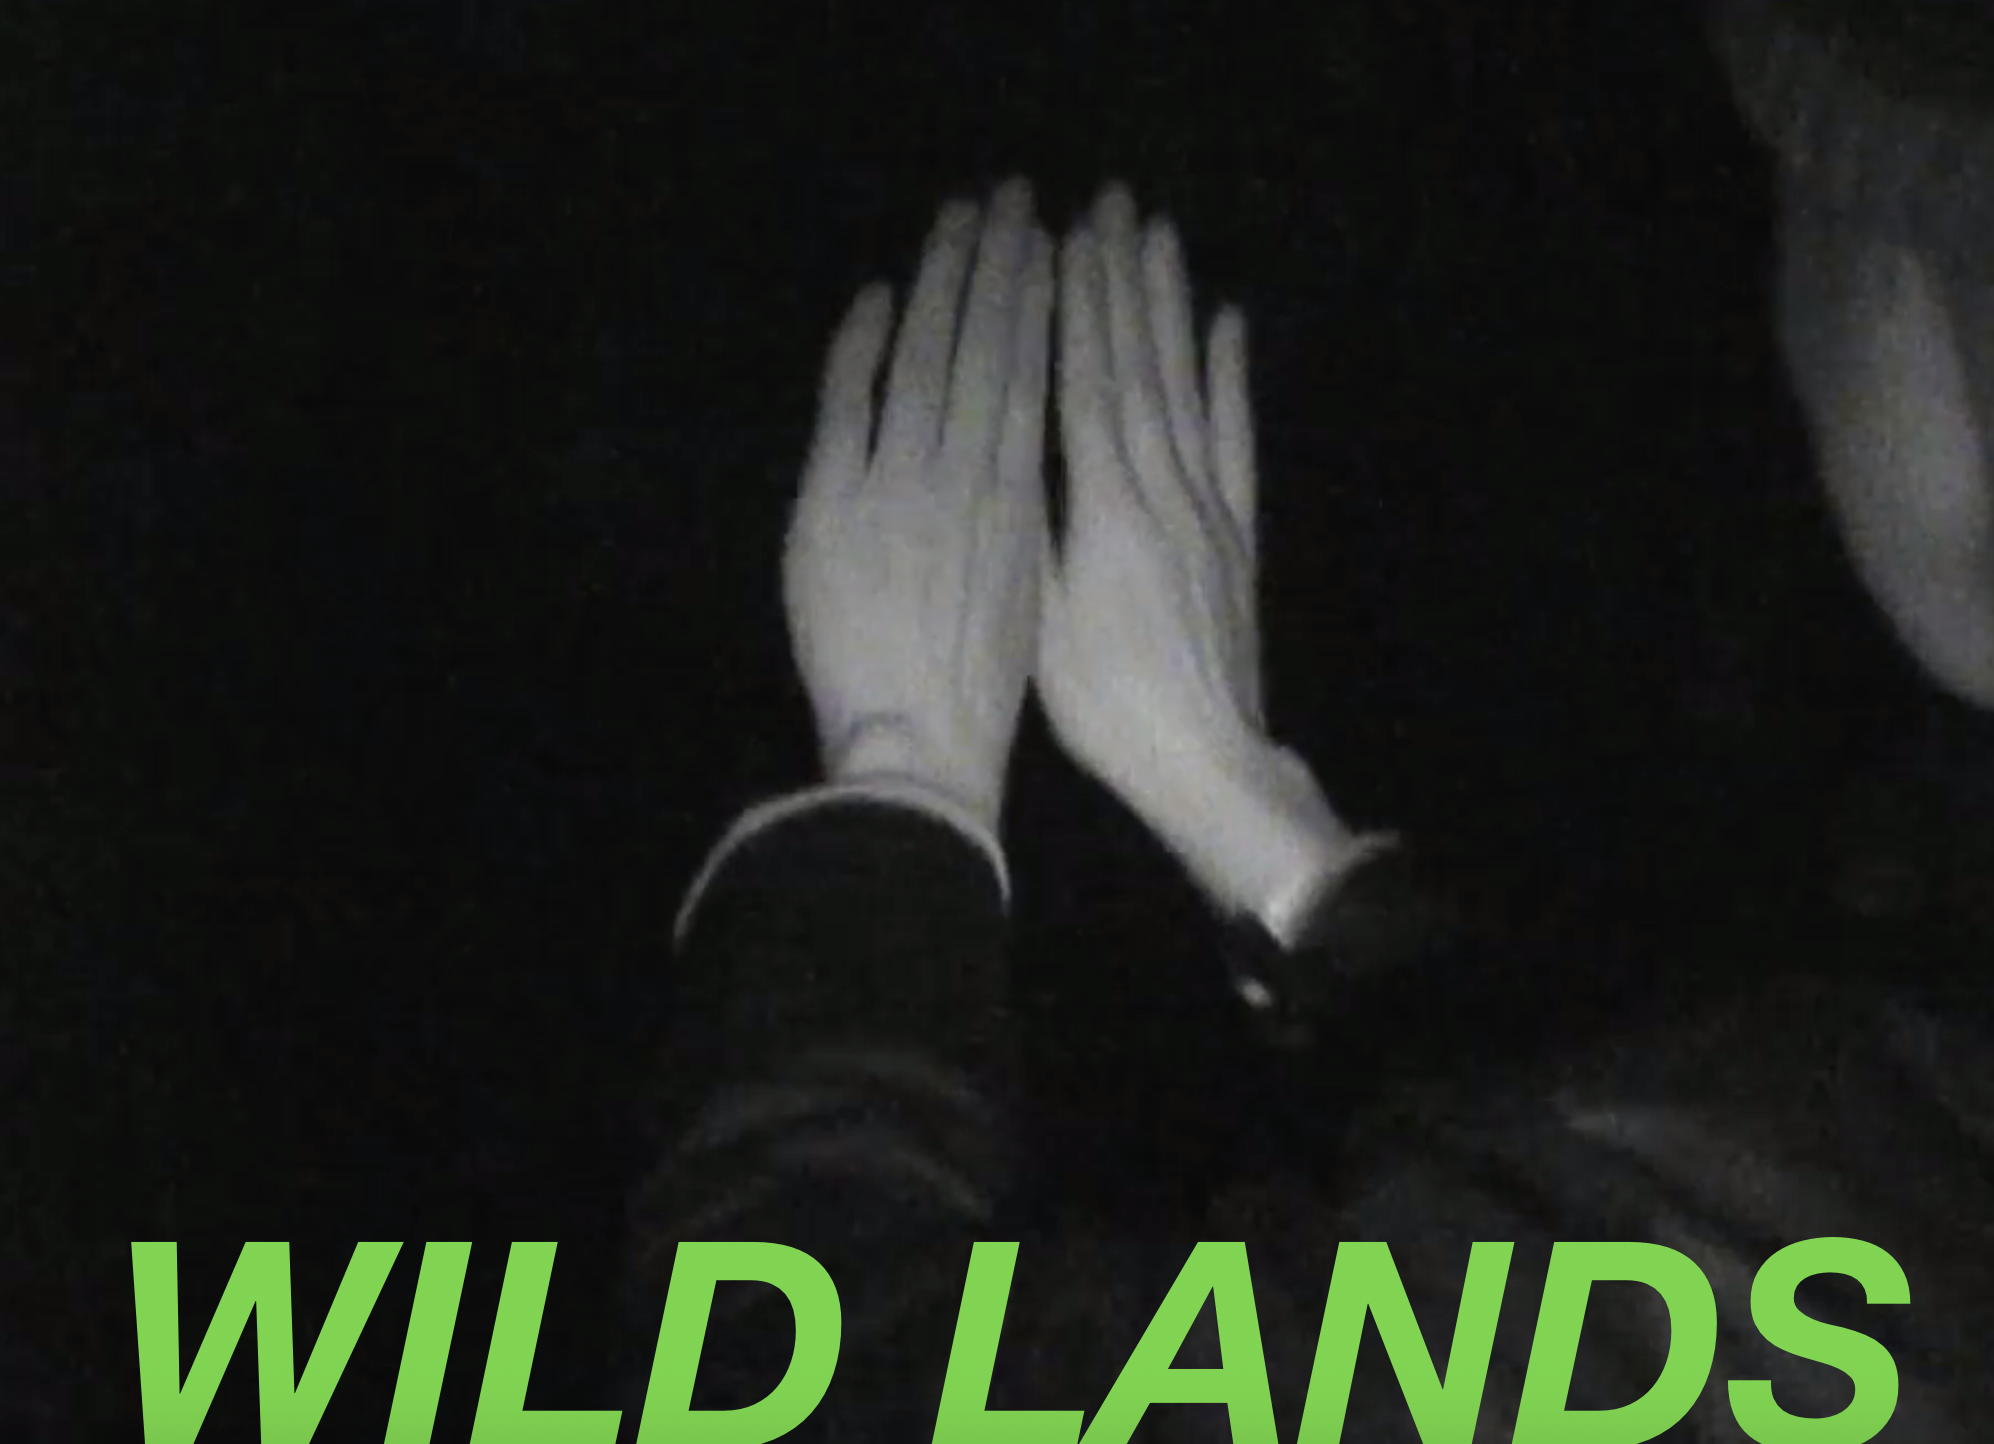 WILD LANDS. Portico Library Dec.2019. Choreographic Video and Discussion. With Juliet Davis, Rowland Hill and Joe Whitmore.4.png